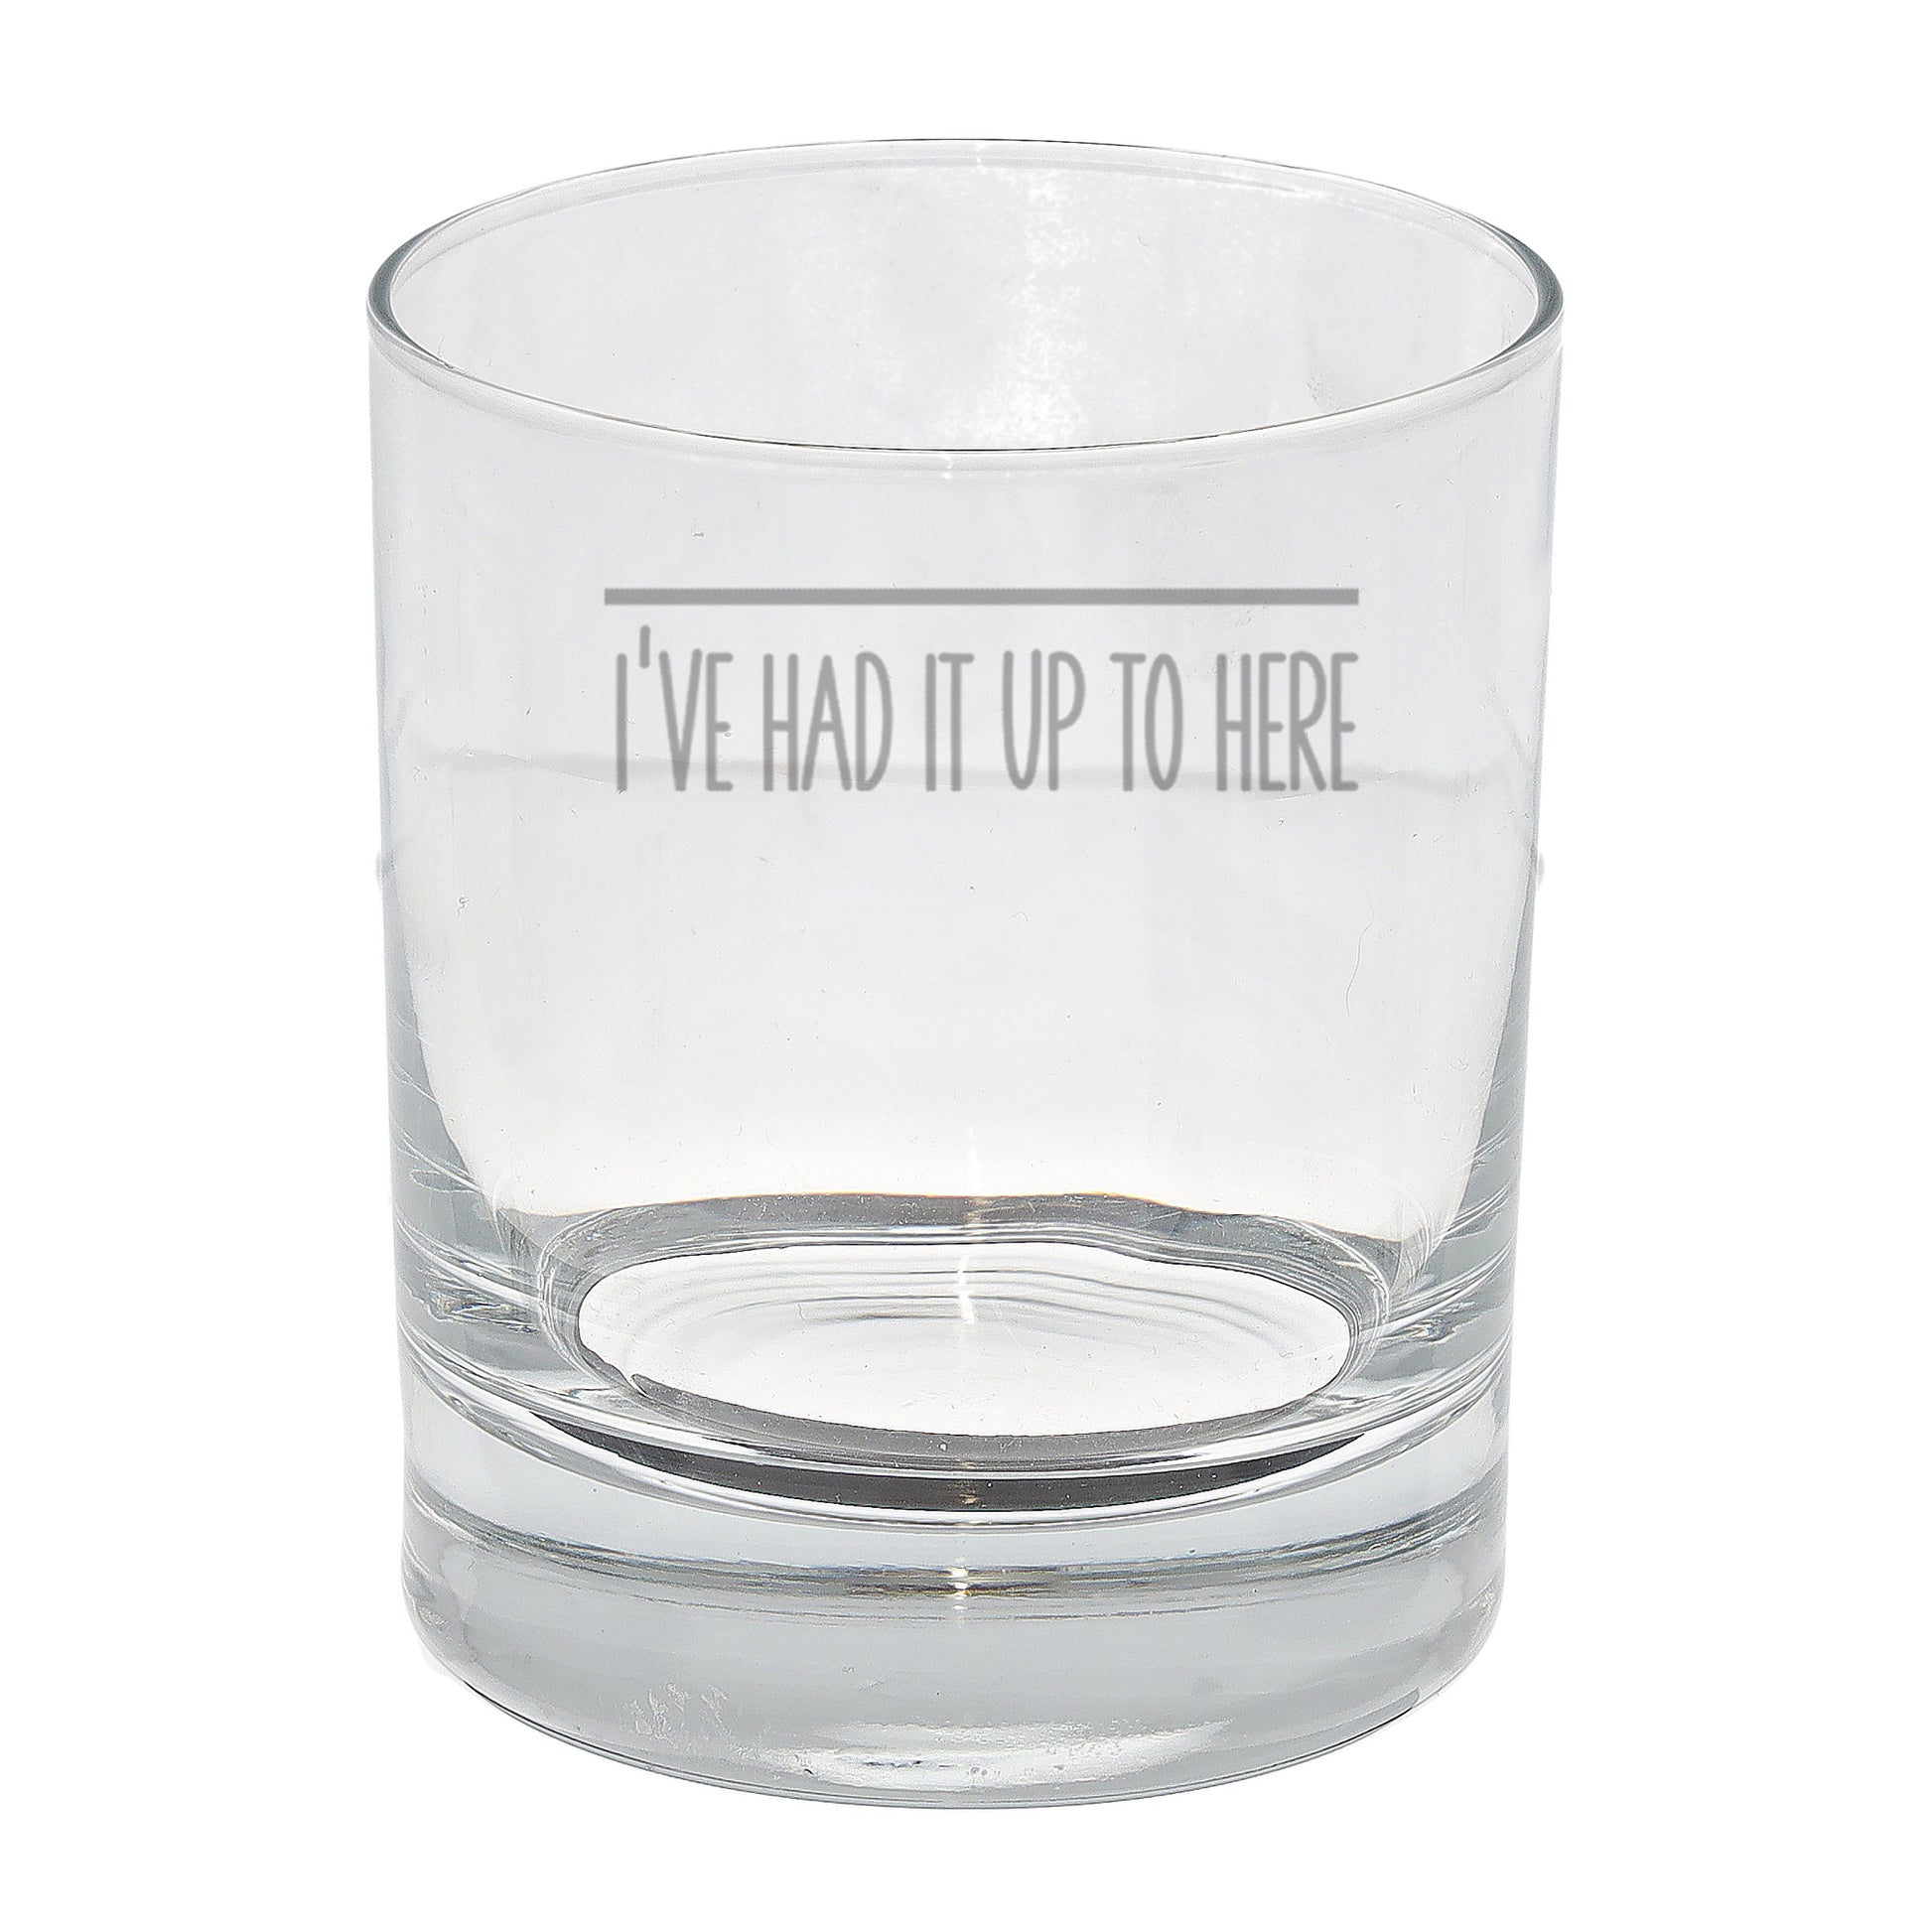 Engraved Funny Whisky Glass Bad Day Measurement Design  - Always Looking Good -   